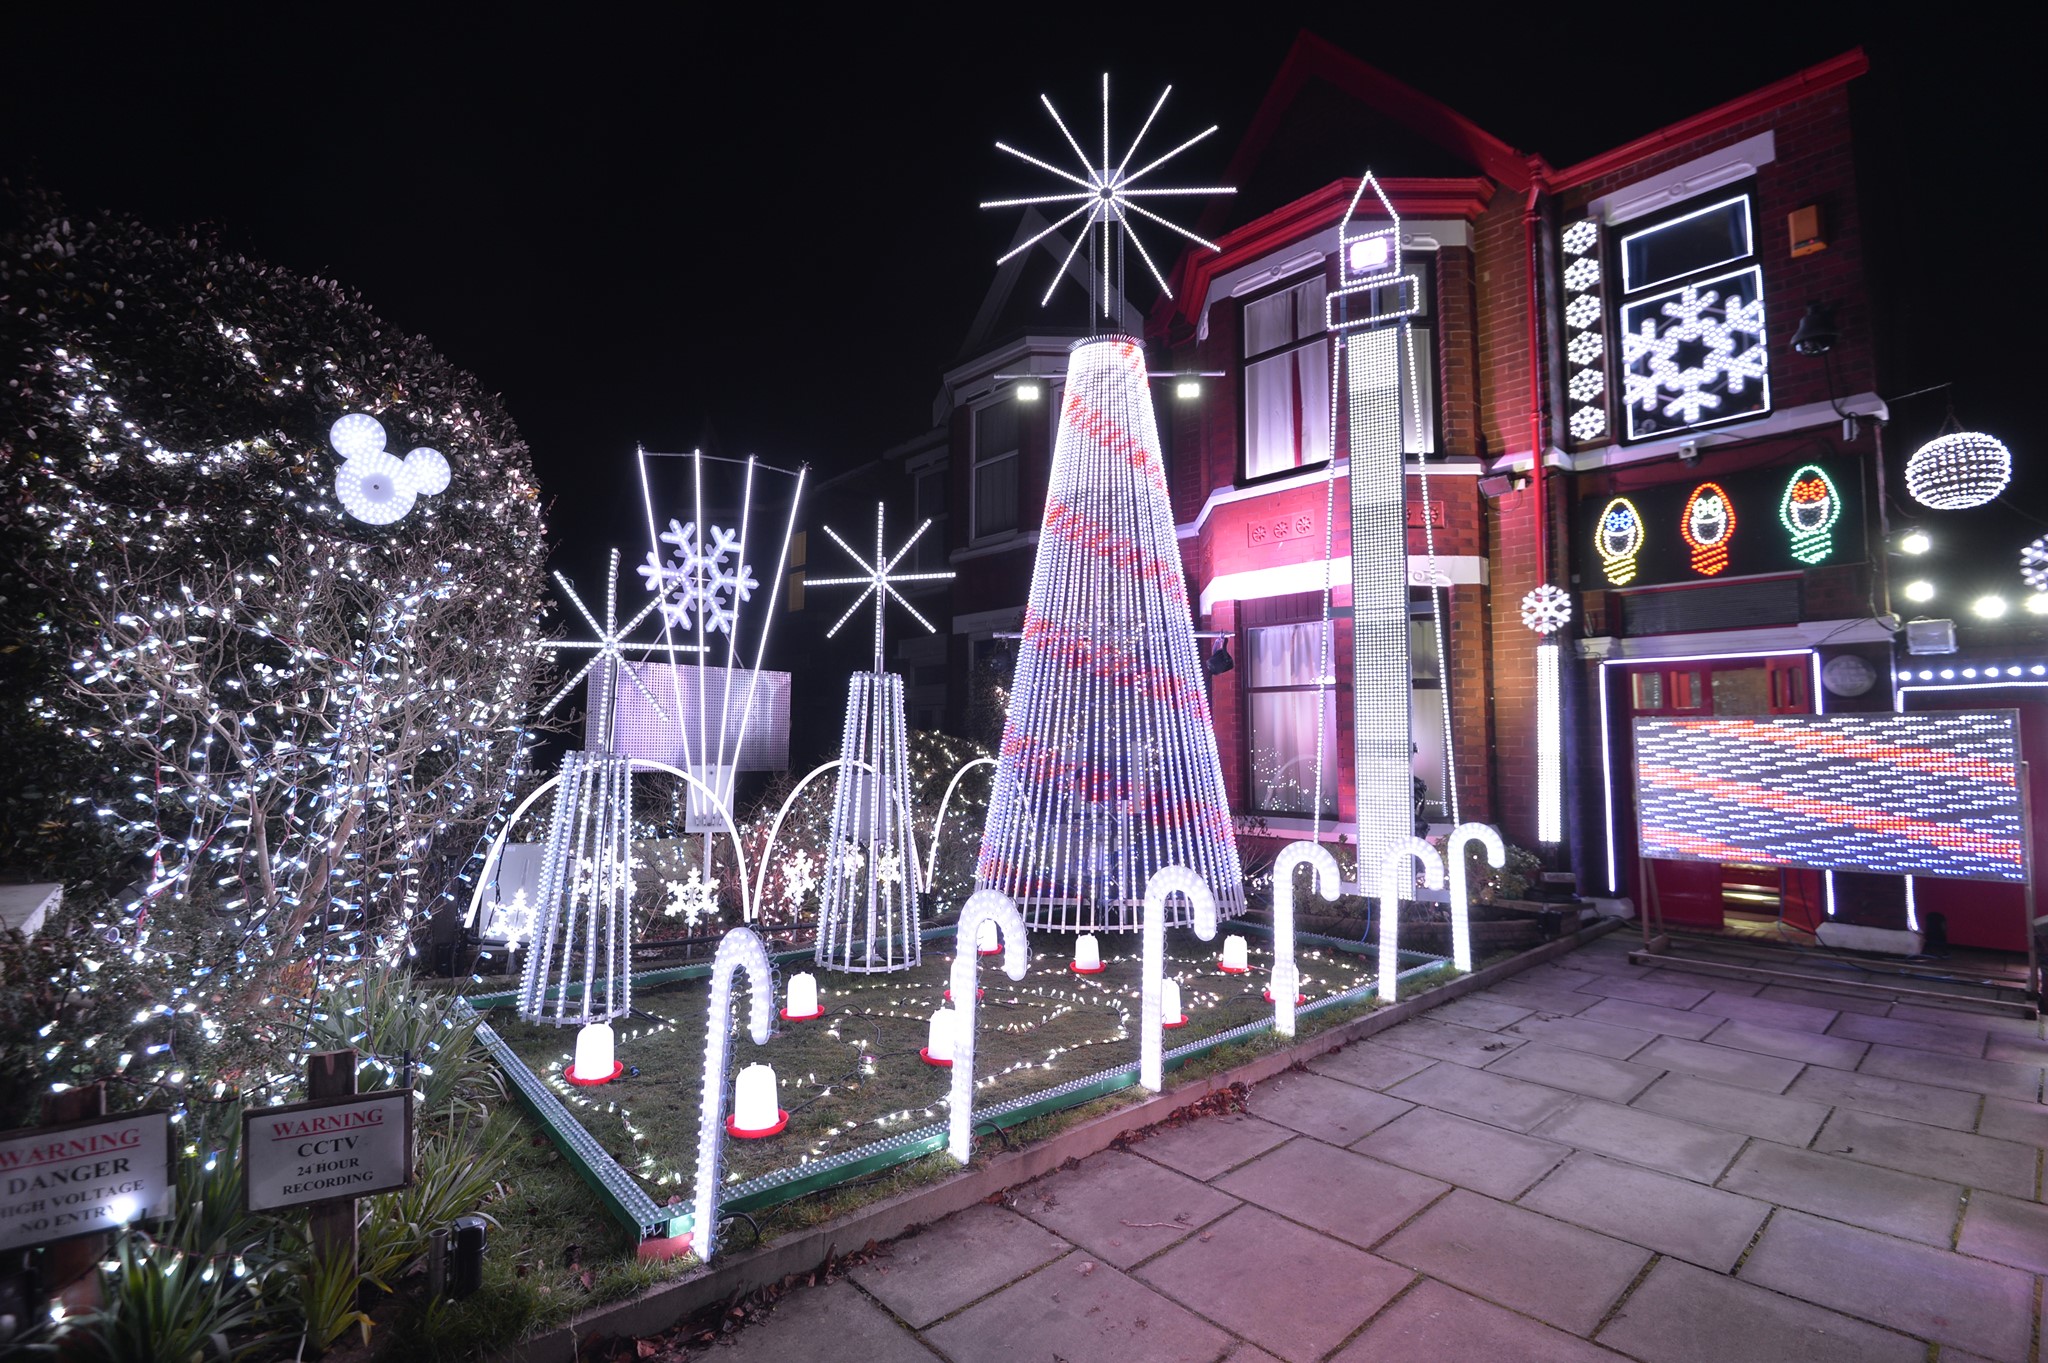 Sidney Road Lights in Southport